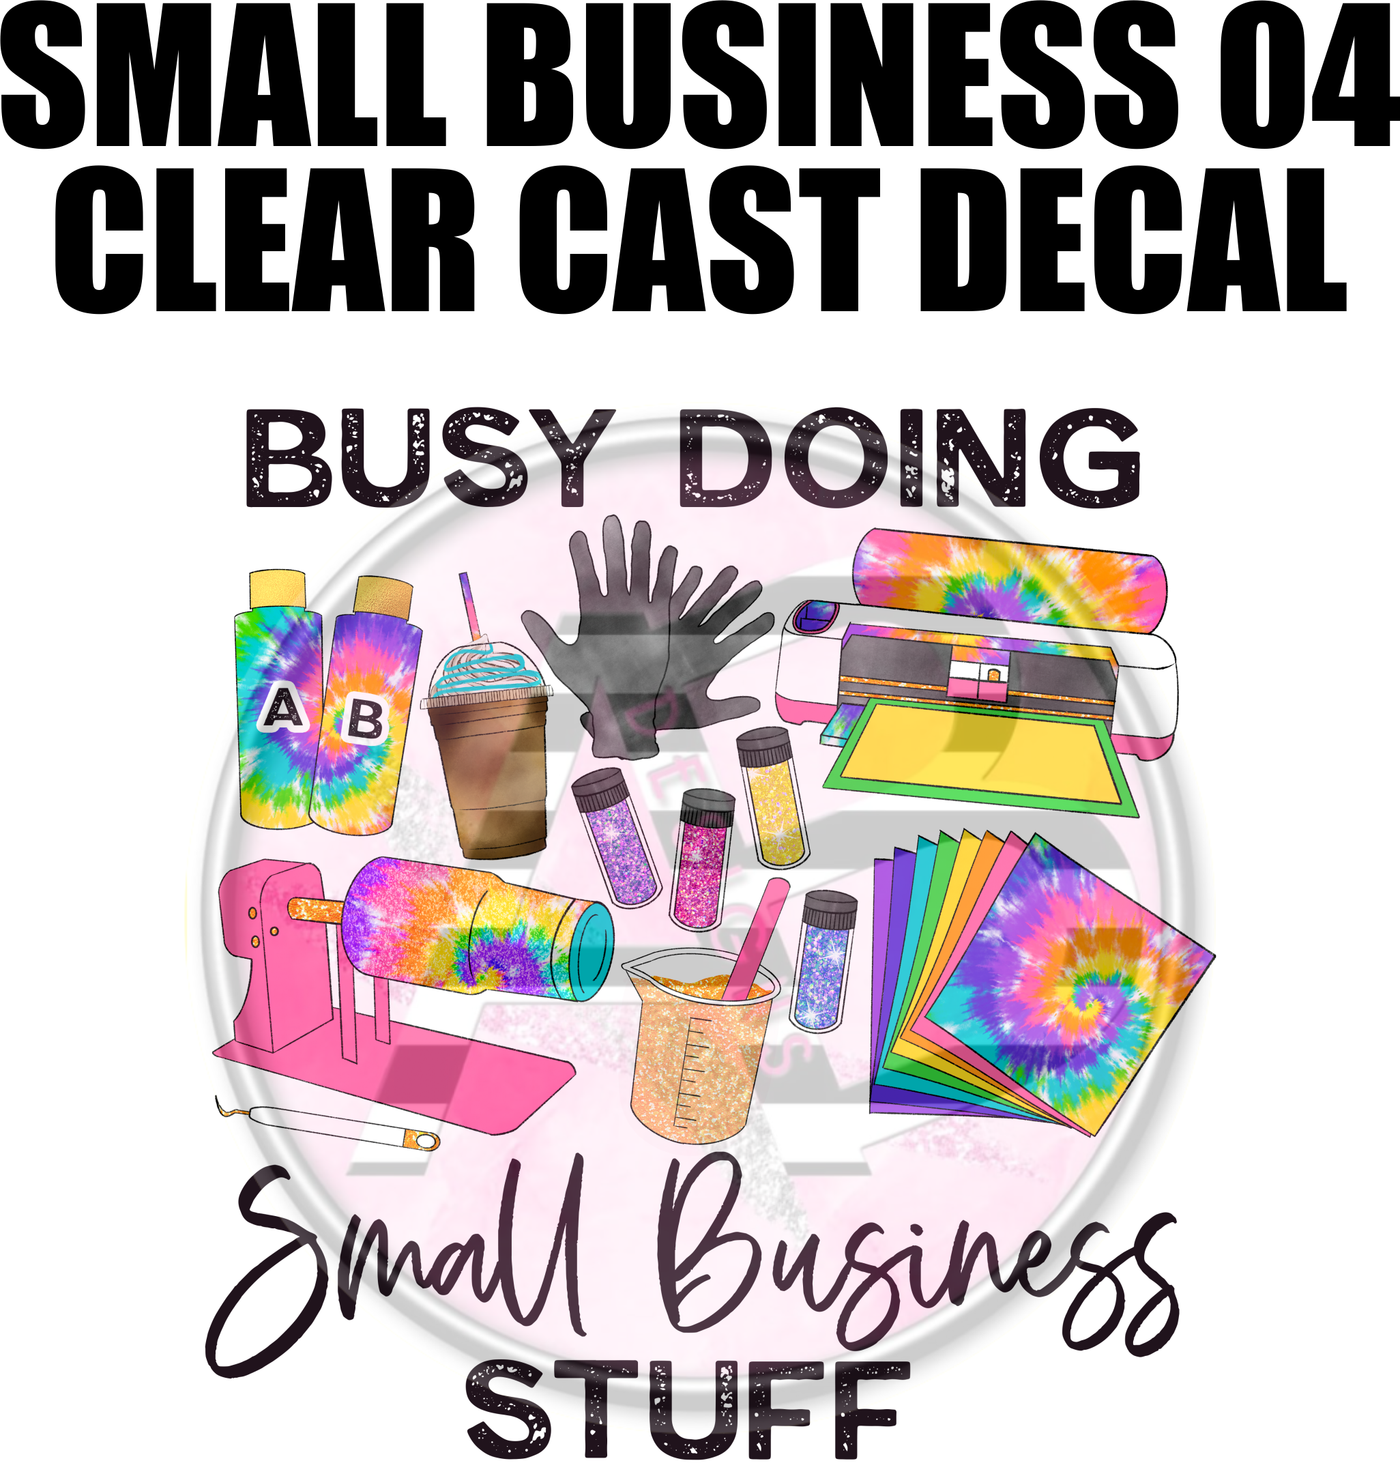 Small Business 04 - Clear Cast Decal